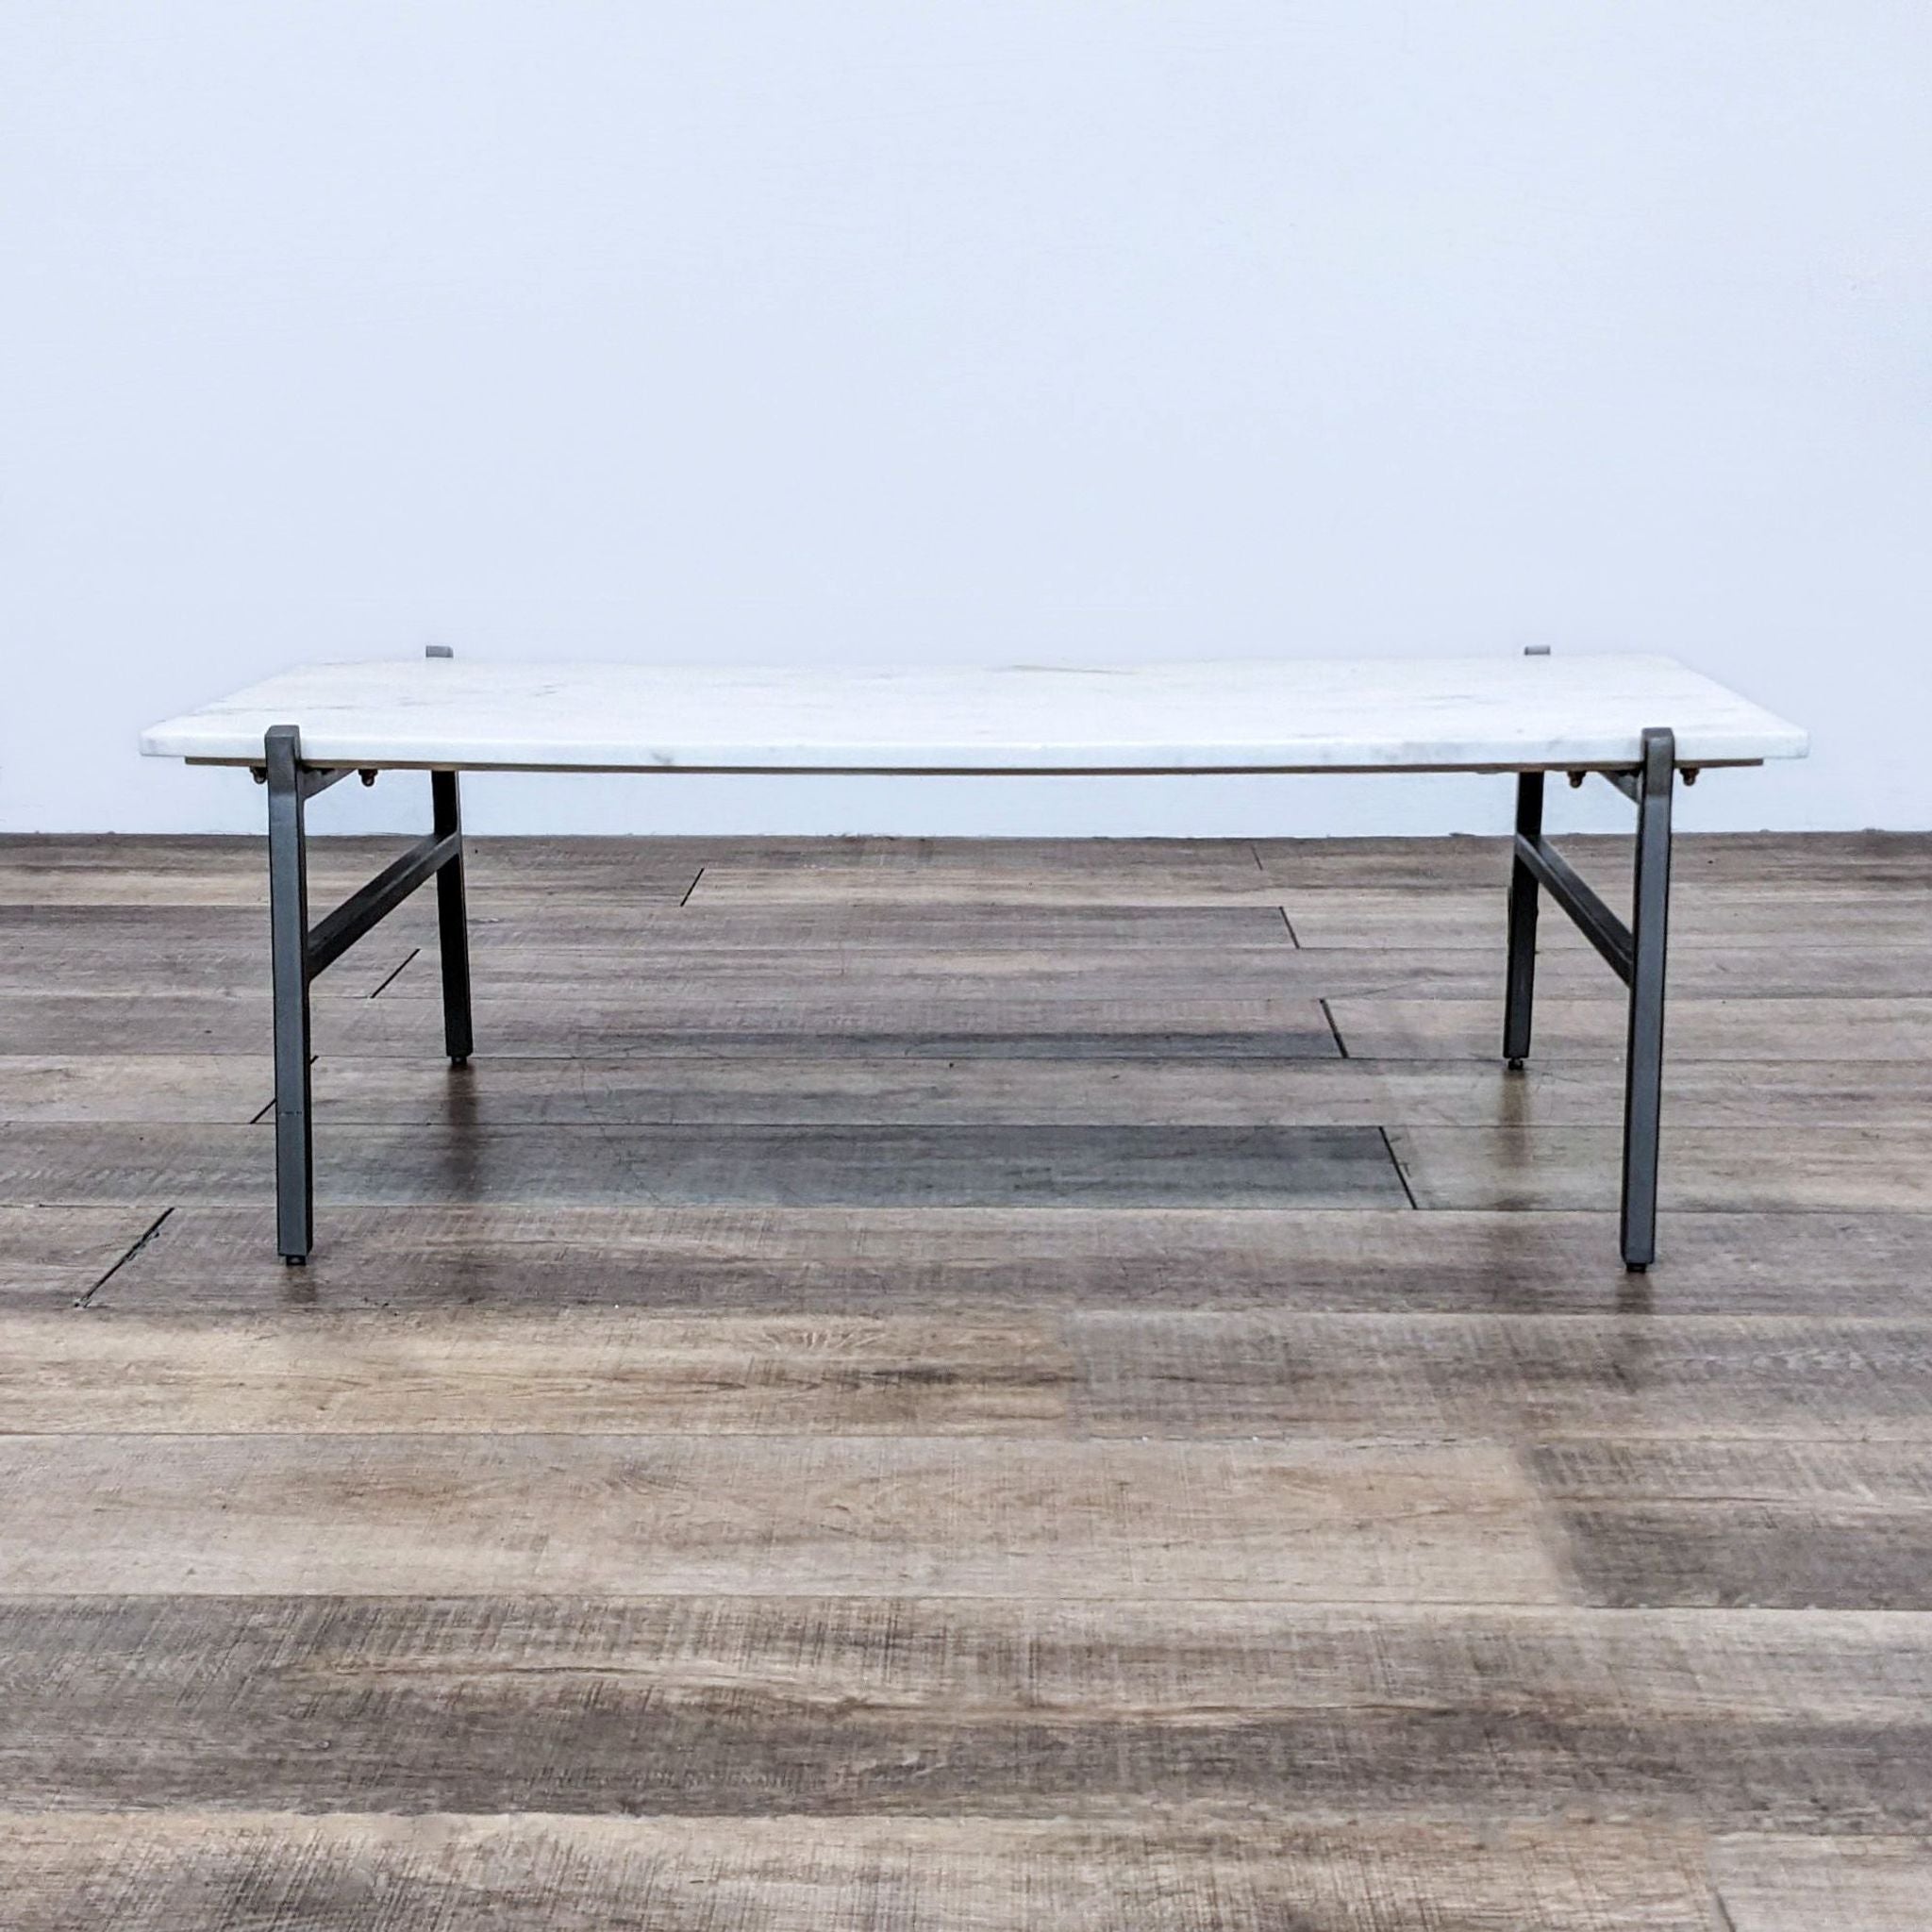 CB2 brand coffee table featuring a marble slab top on a steel base, shown against a wooden floor.